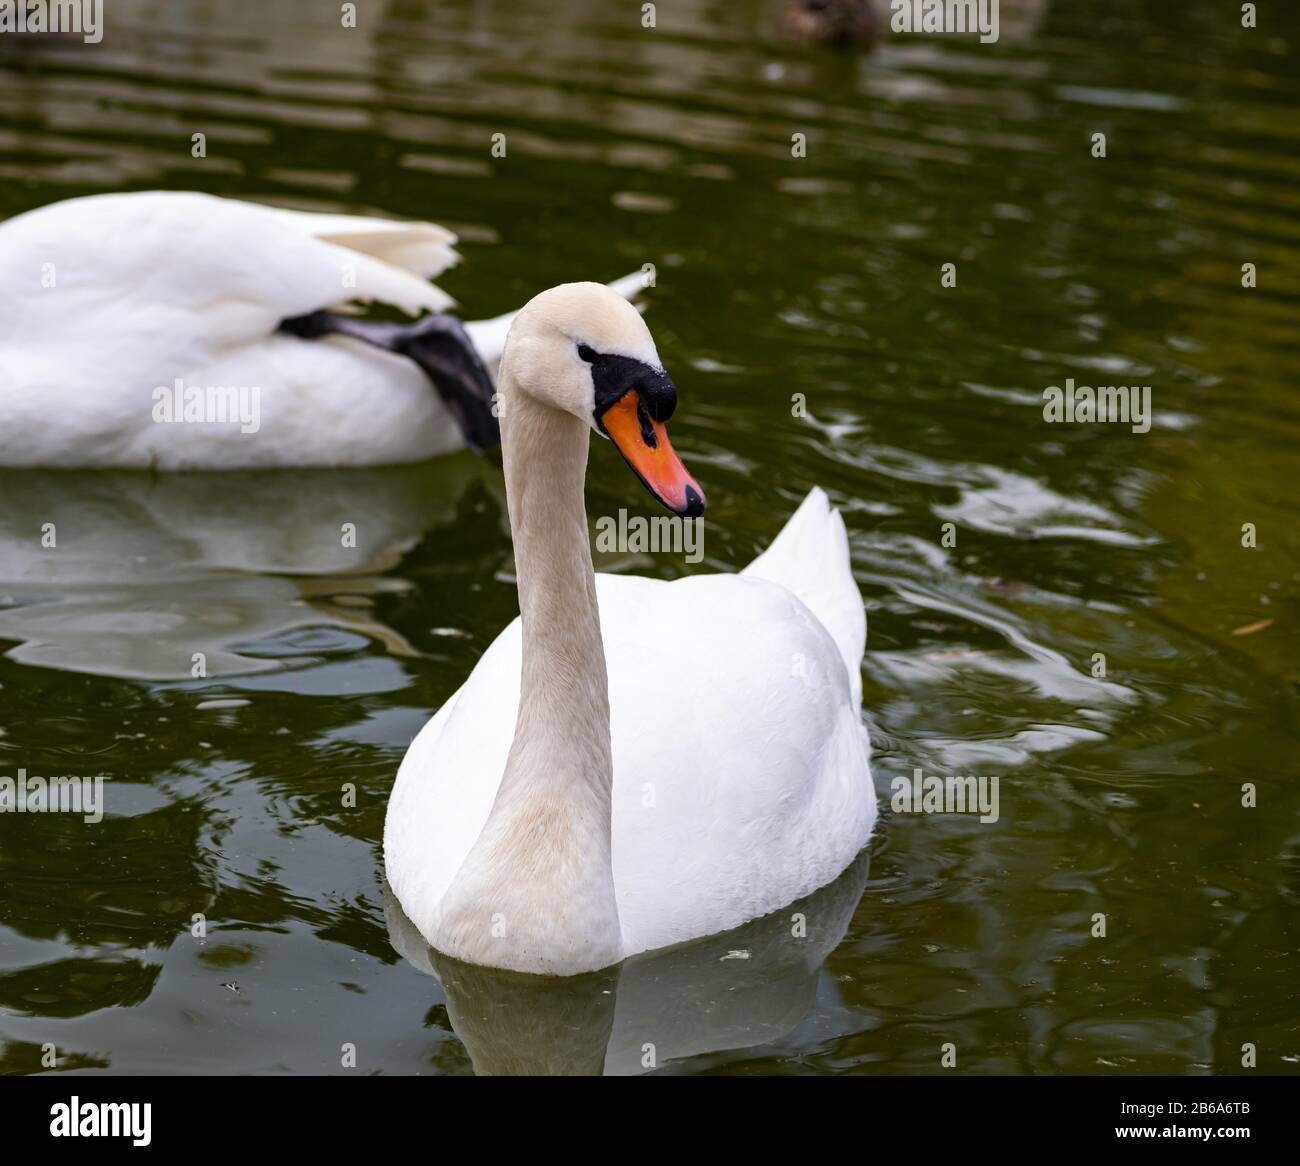 A Swan With Dirty White Feathers and An Orange Bill Stock Photo